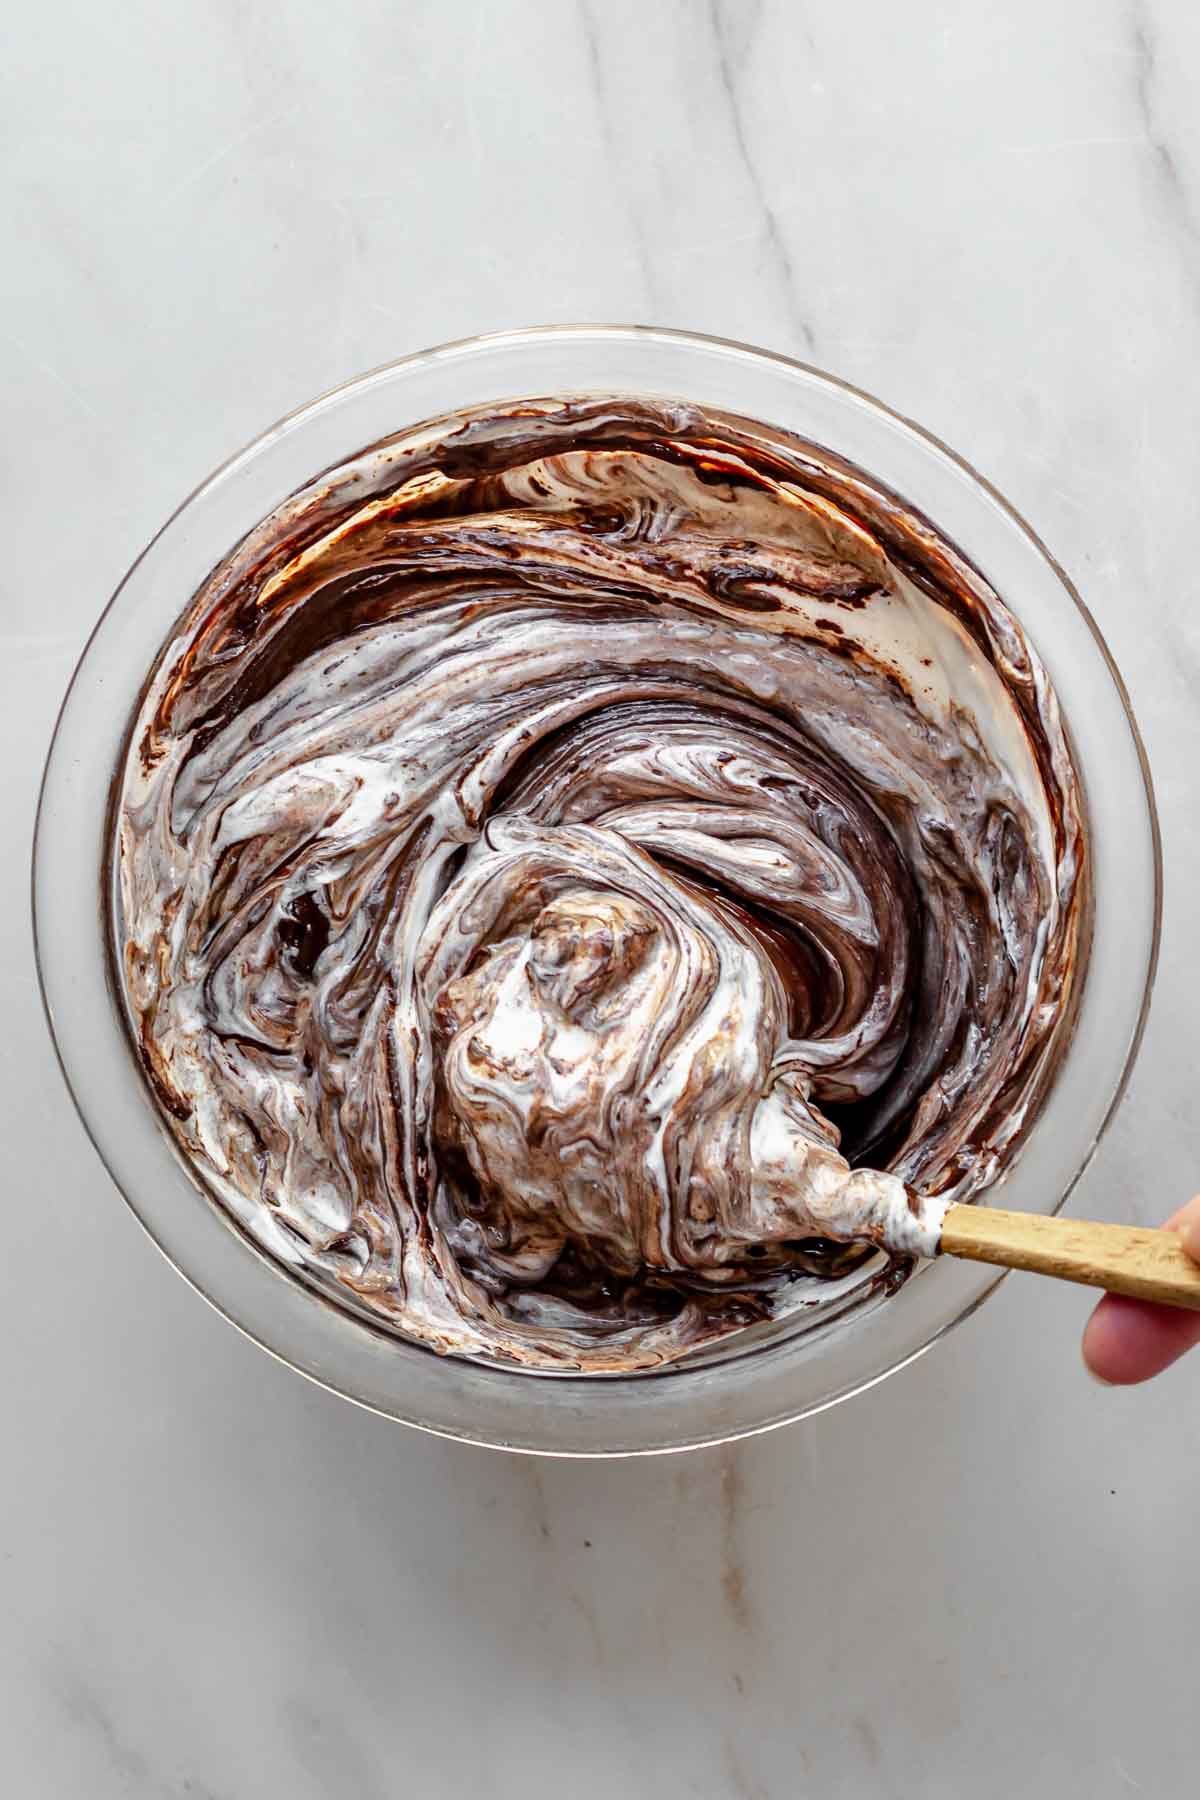 A hand mixes melted chocolate and sour cream in a bowl.